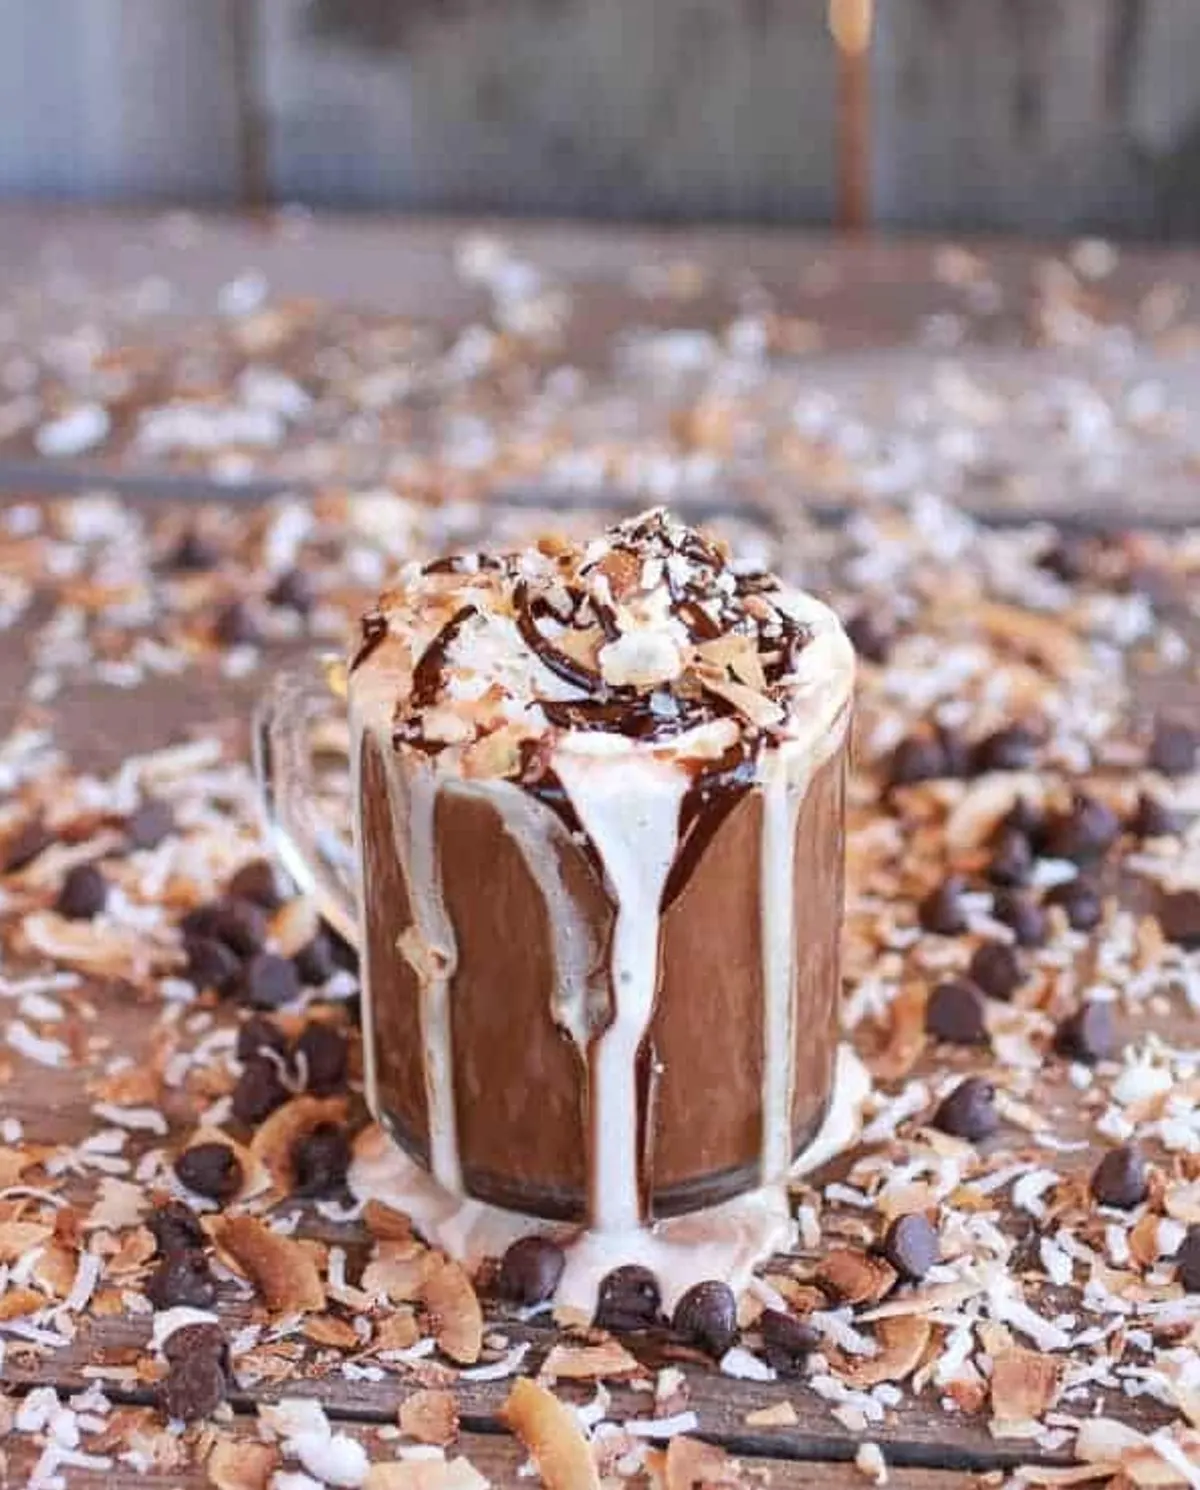 Toasted Coconut Chocolate Pumpkin Spice Latte with Chocolate Drizzle